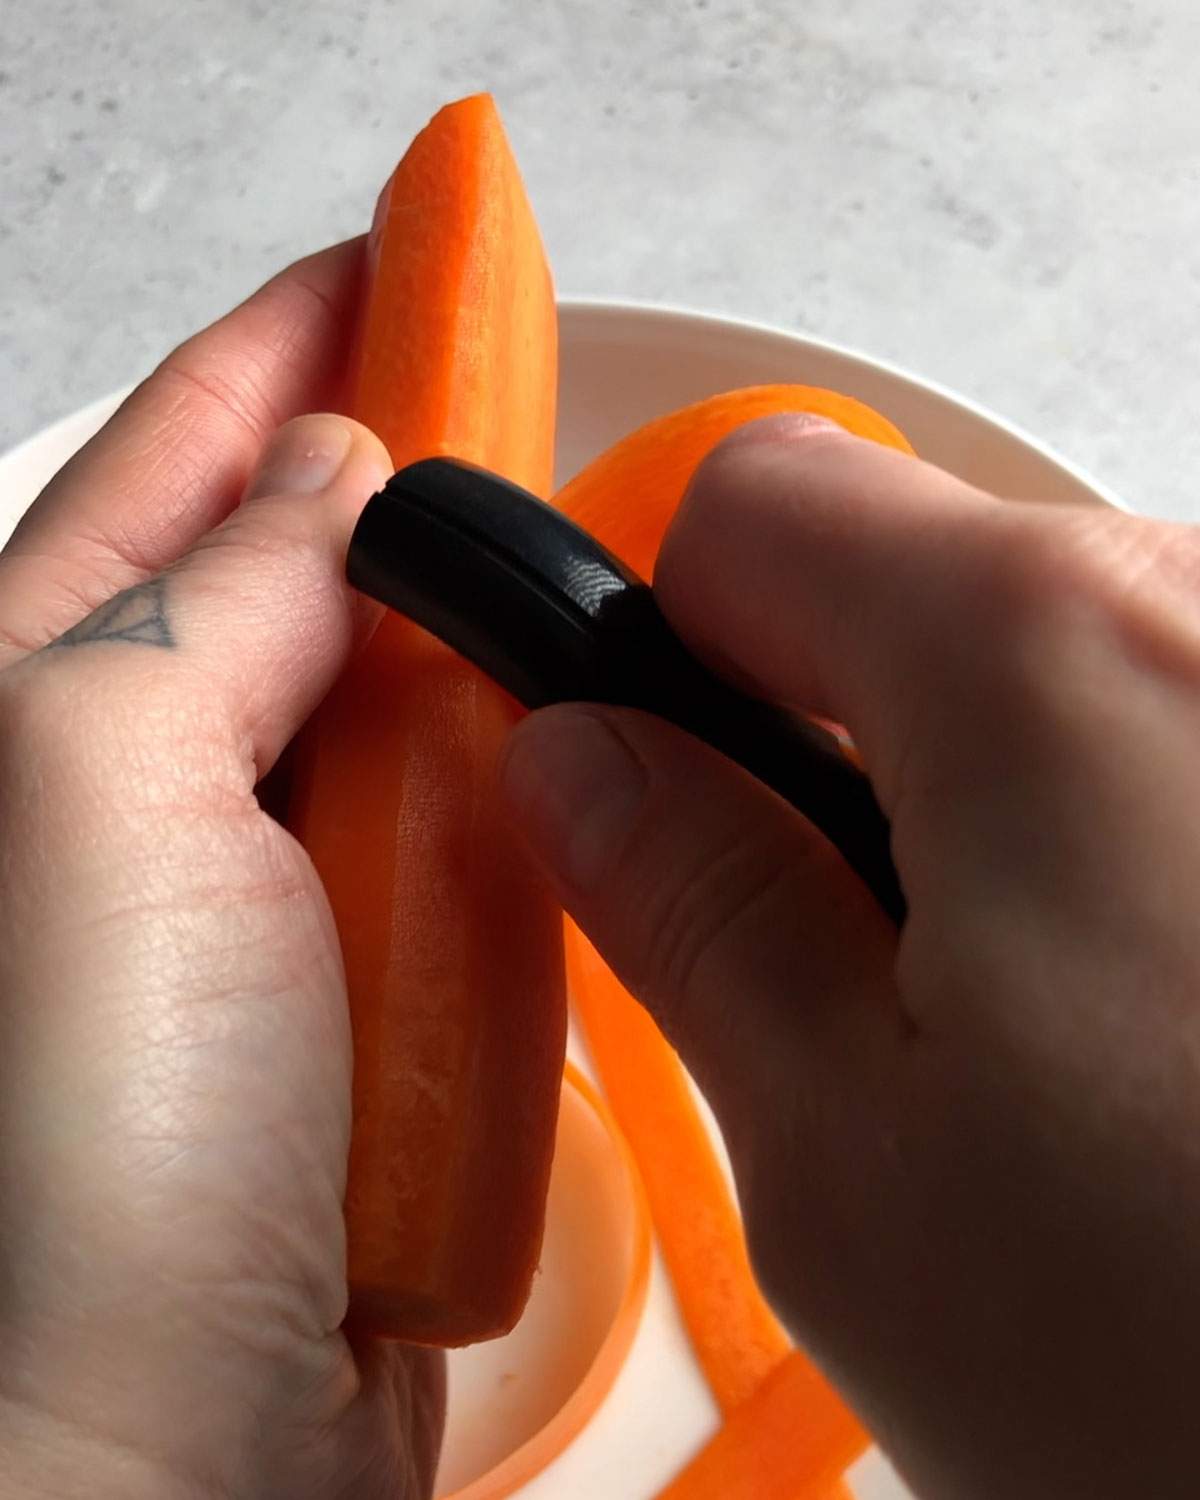 shaving a carrot with a vegetable peeler